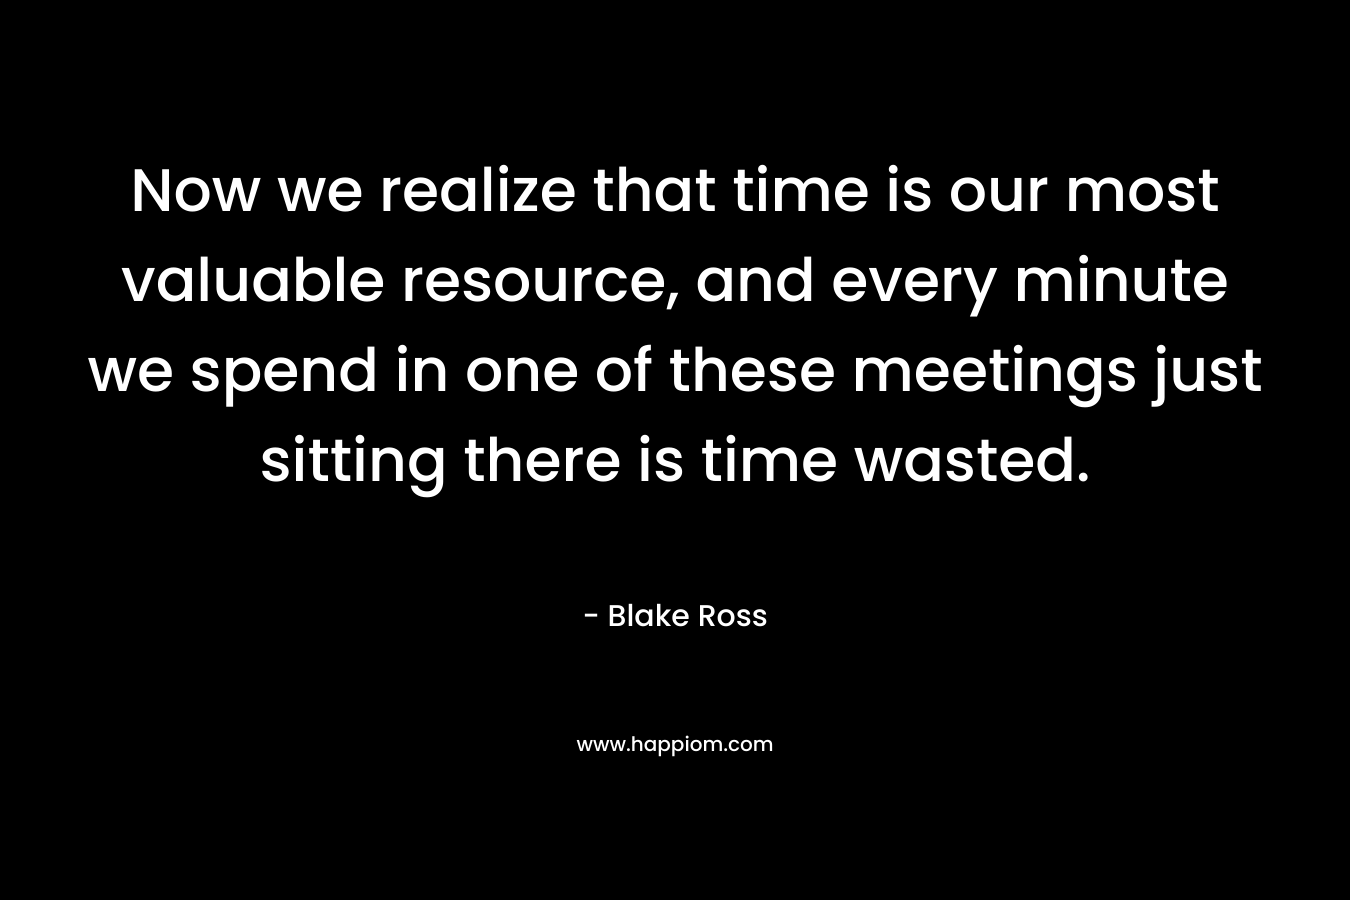 Now we realize that time is our most valuable resource, and every minute we spend in one of these meetings just sitting there is time wasted.